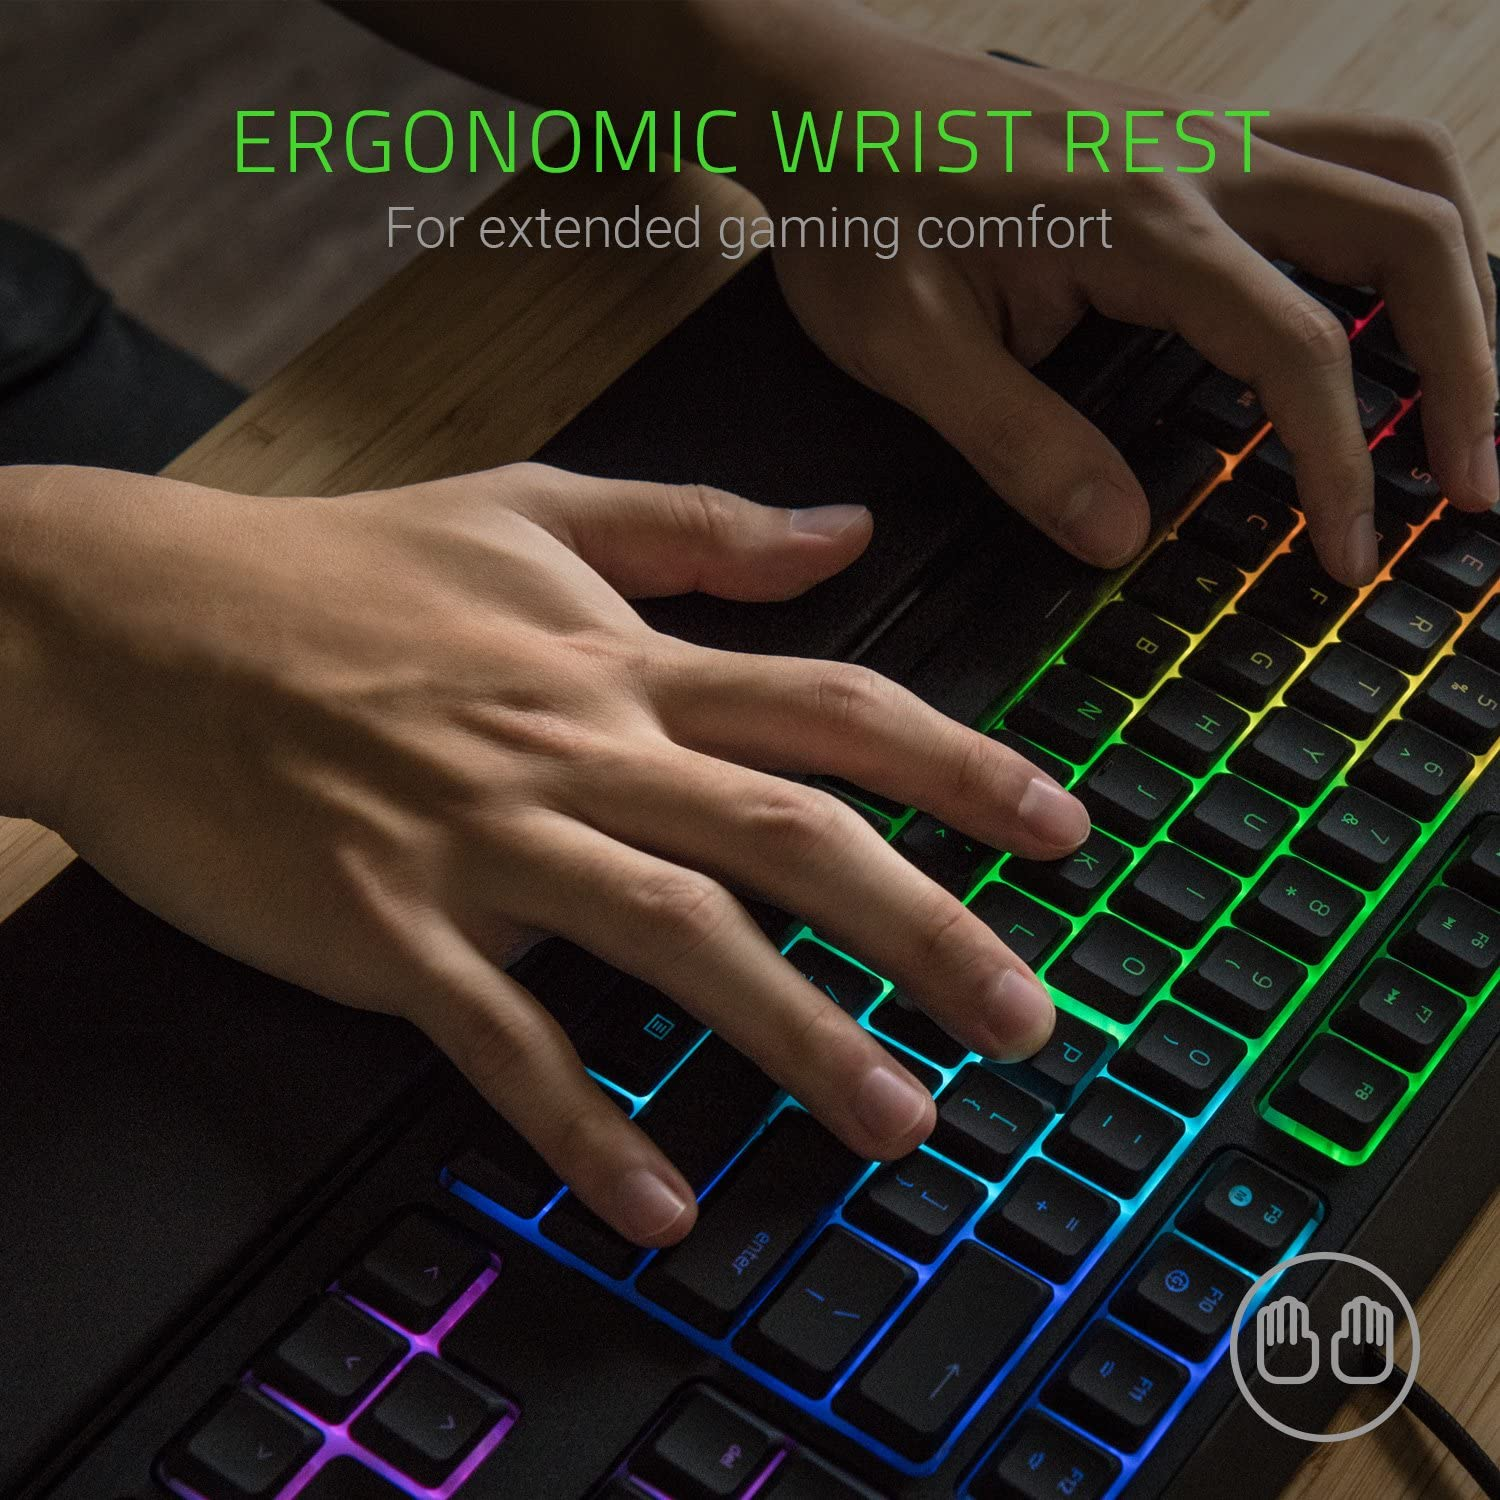 An ergonomic keyboard with a wrist rest will alleviate pain and discomfort during long gaming sessions. 